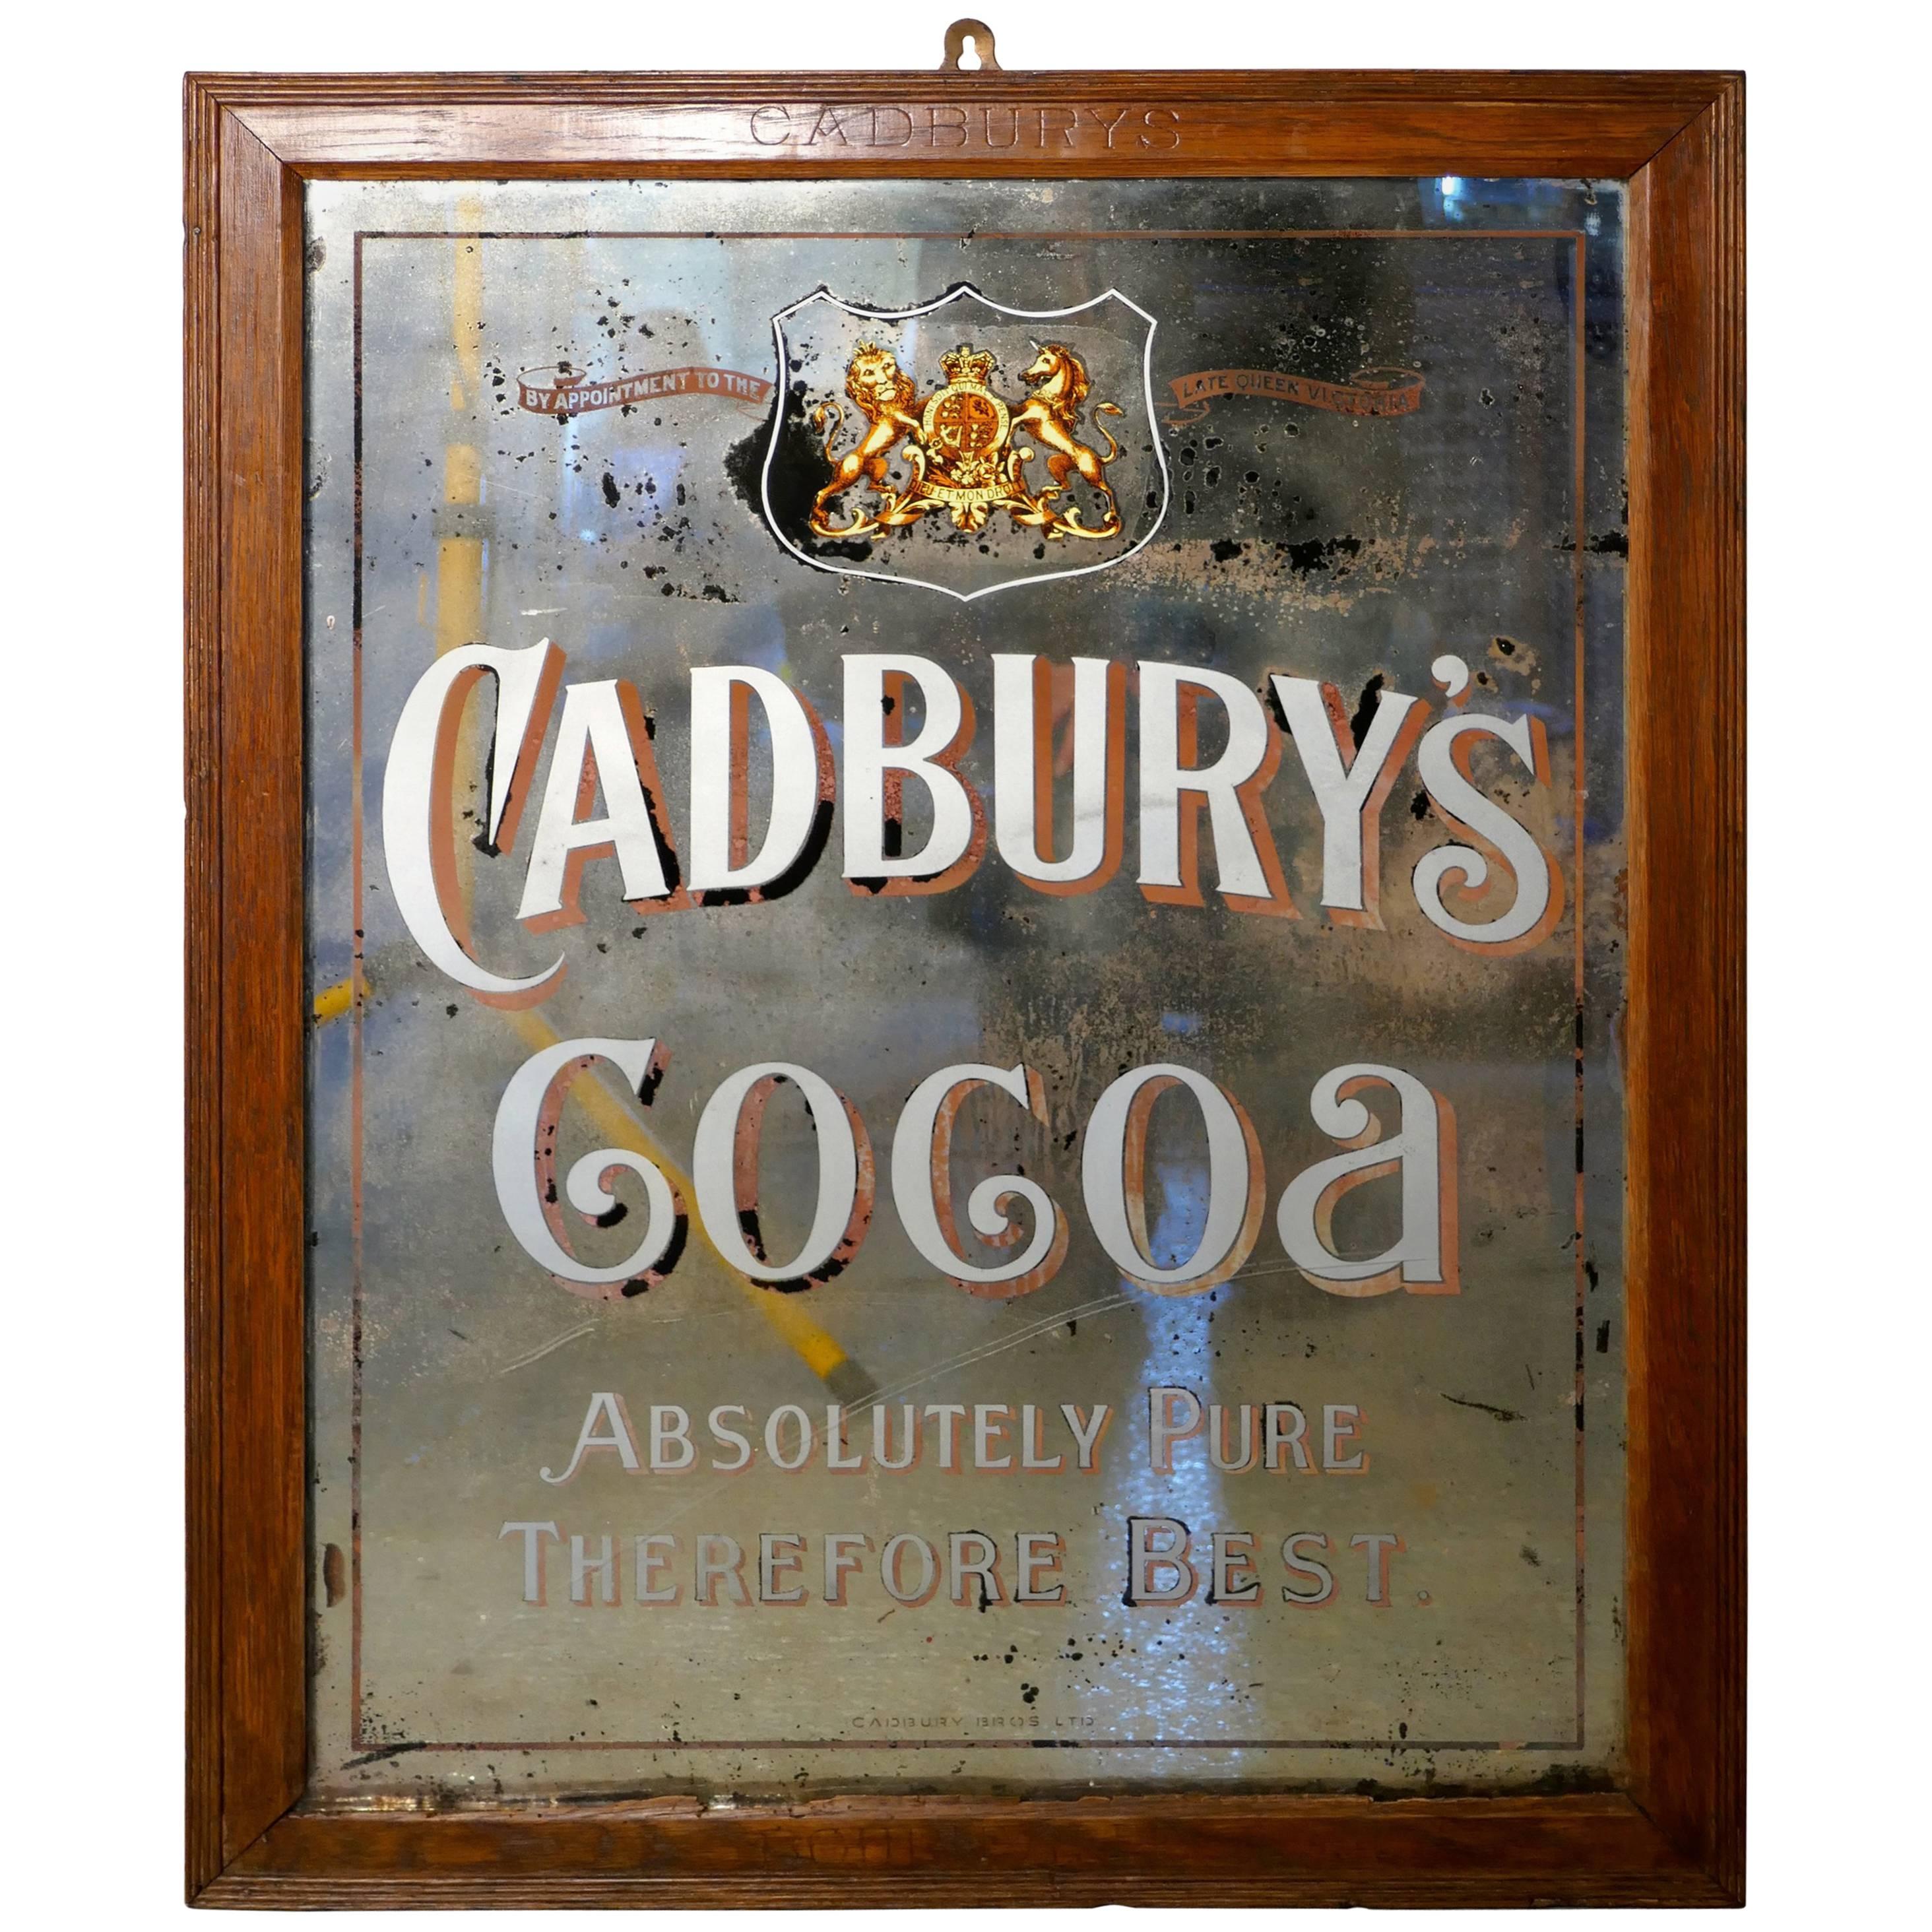 Large Cadbury’s Cocoa Advertising Mirror, Royal Appointment to Queen Victoria